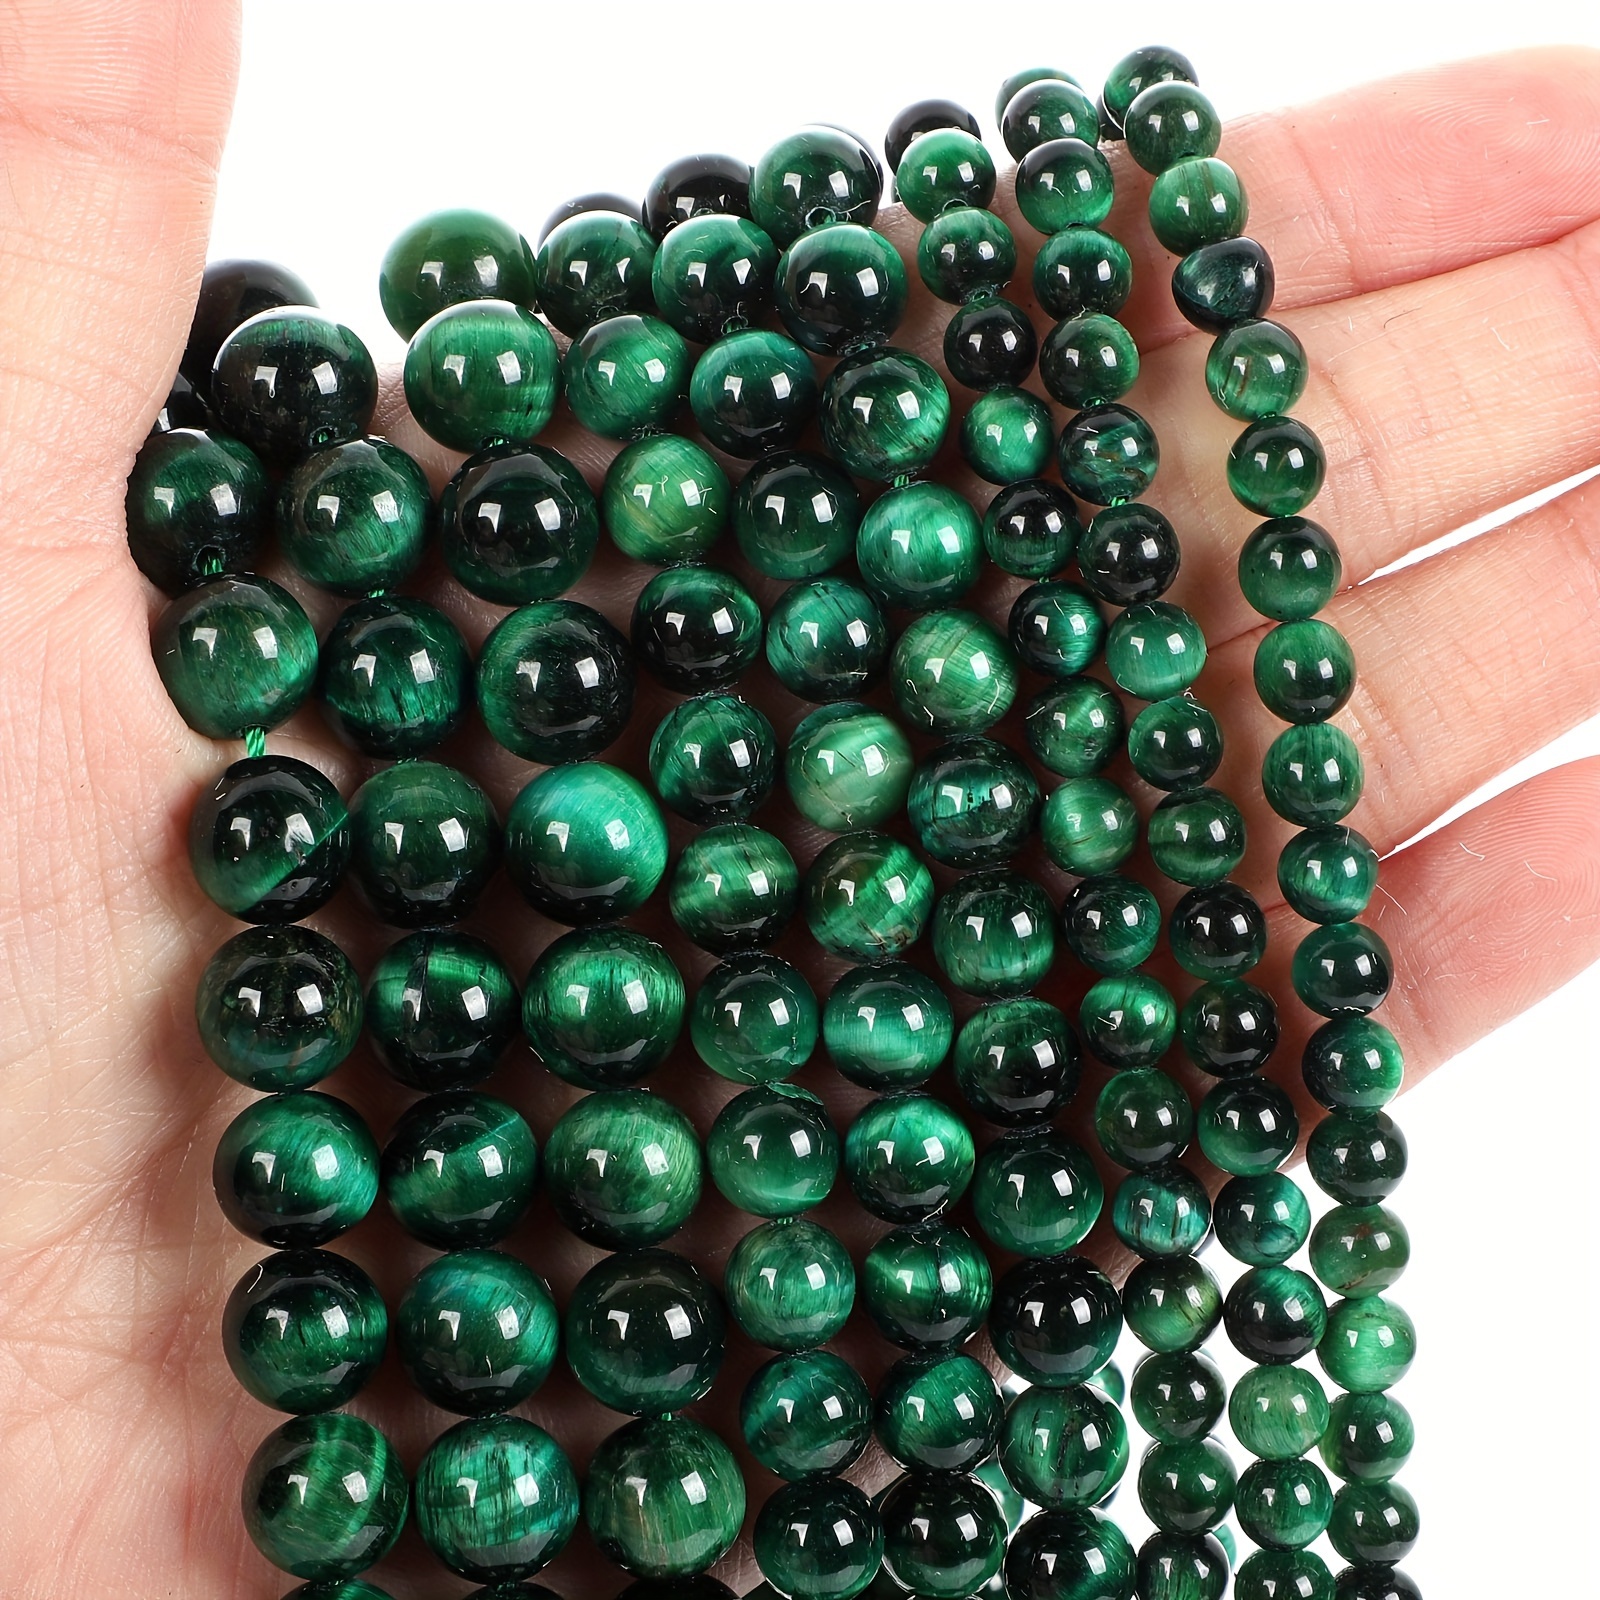 

7a Quality Natural Green Tiger Eye Stone Round Loose Beads For Jewelry Making Diy Charm Bracelet 4-10mm